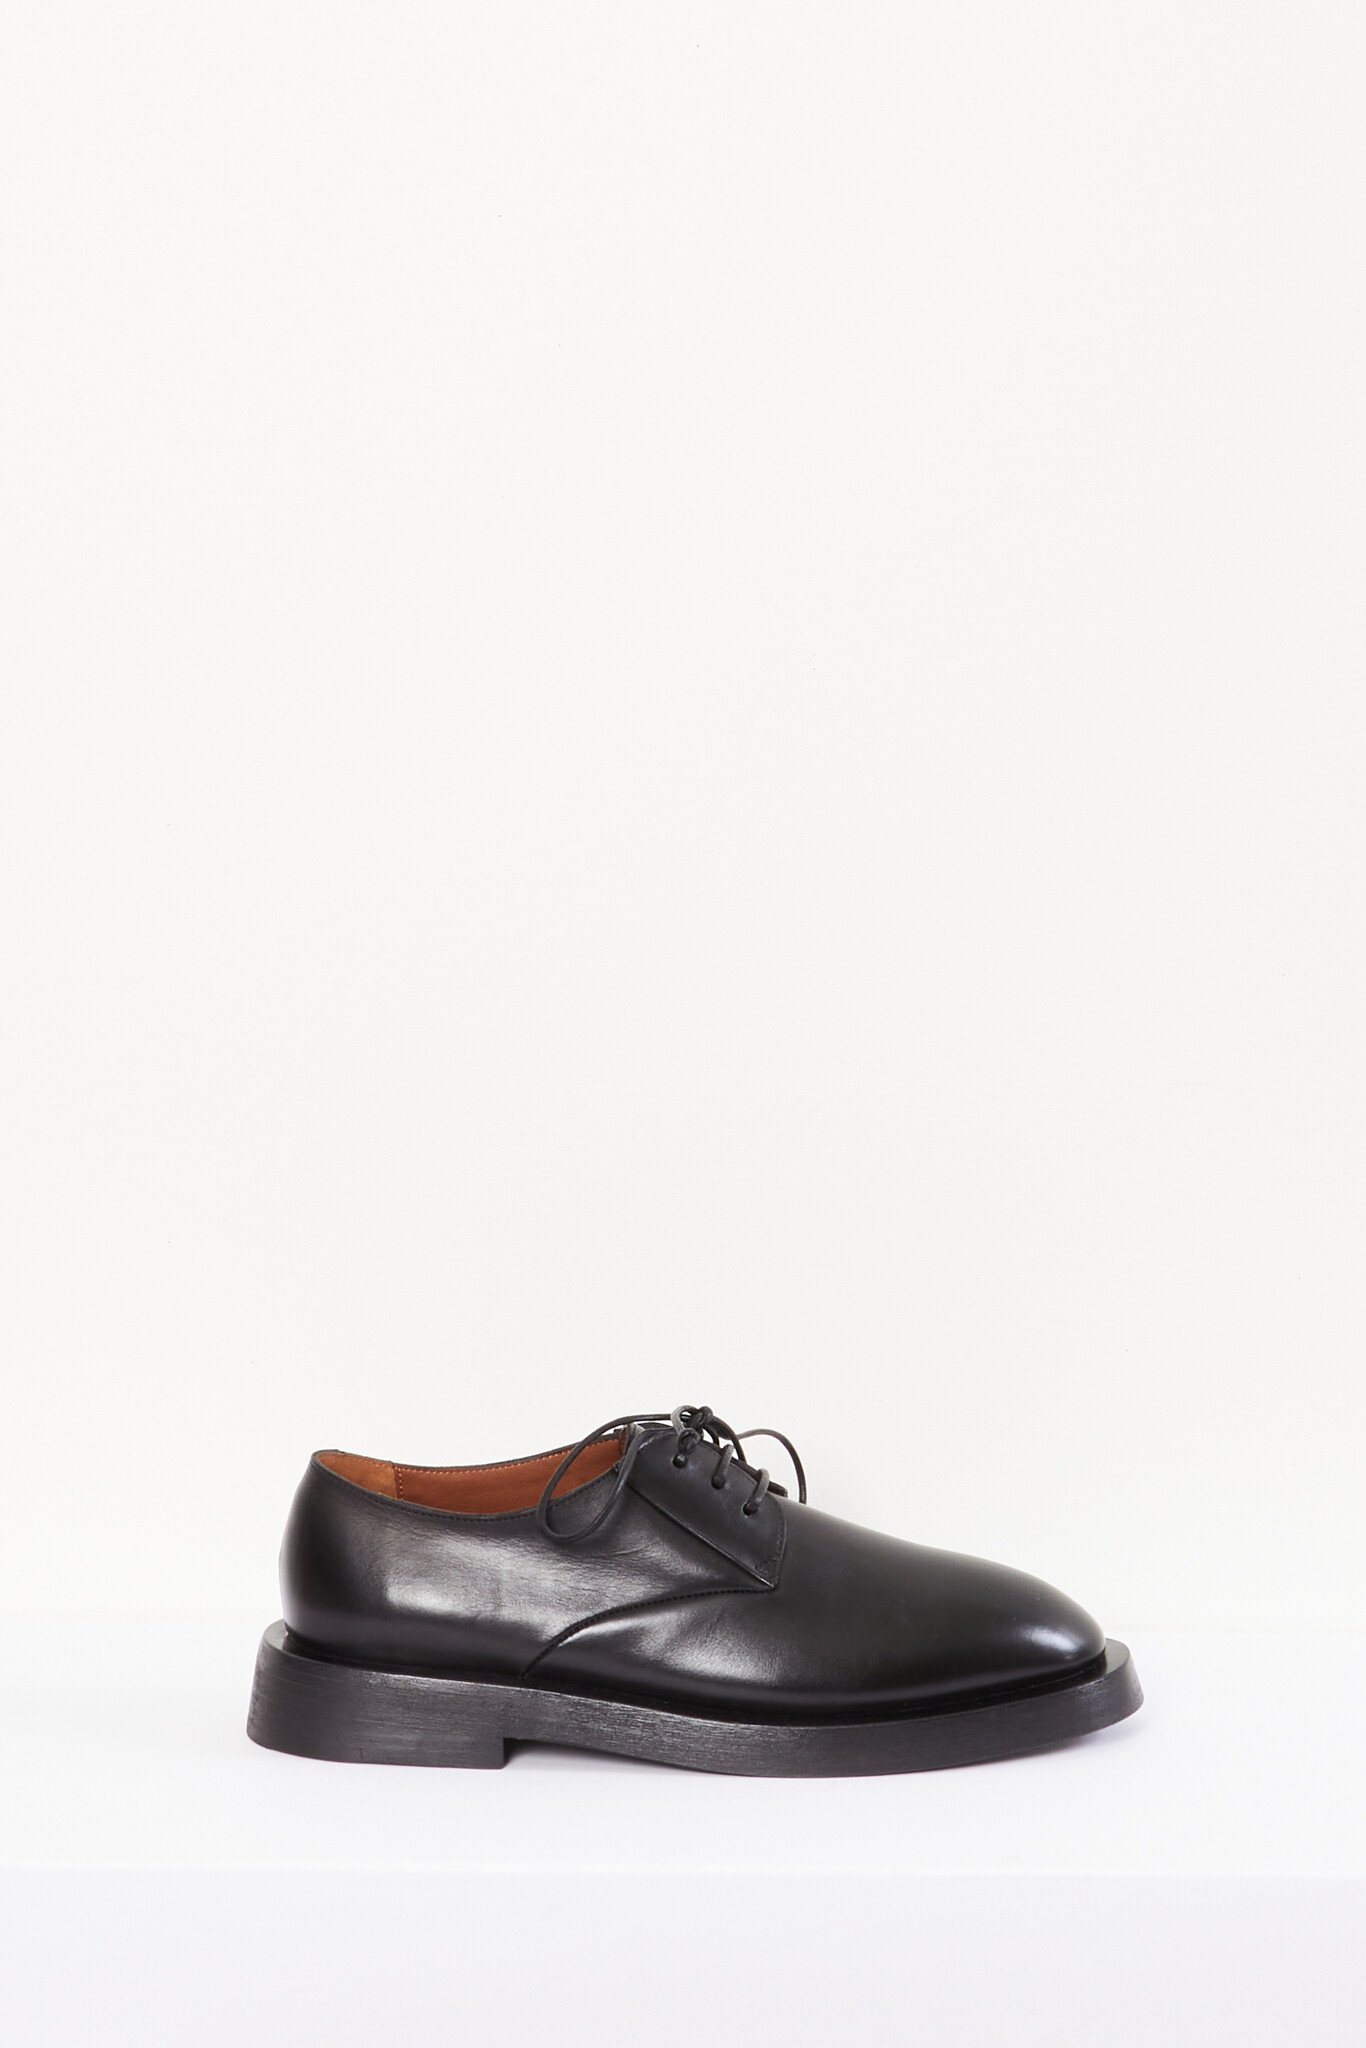 Marsell - Mentone lace ups